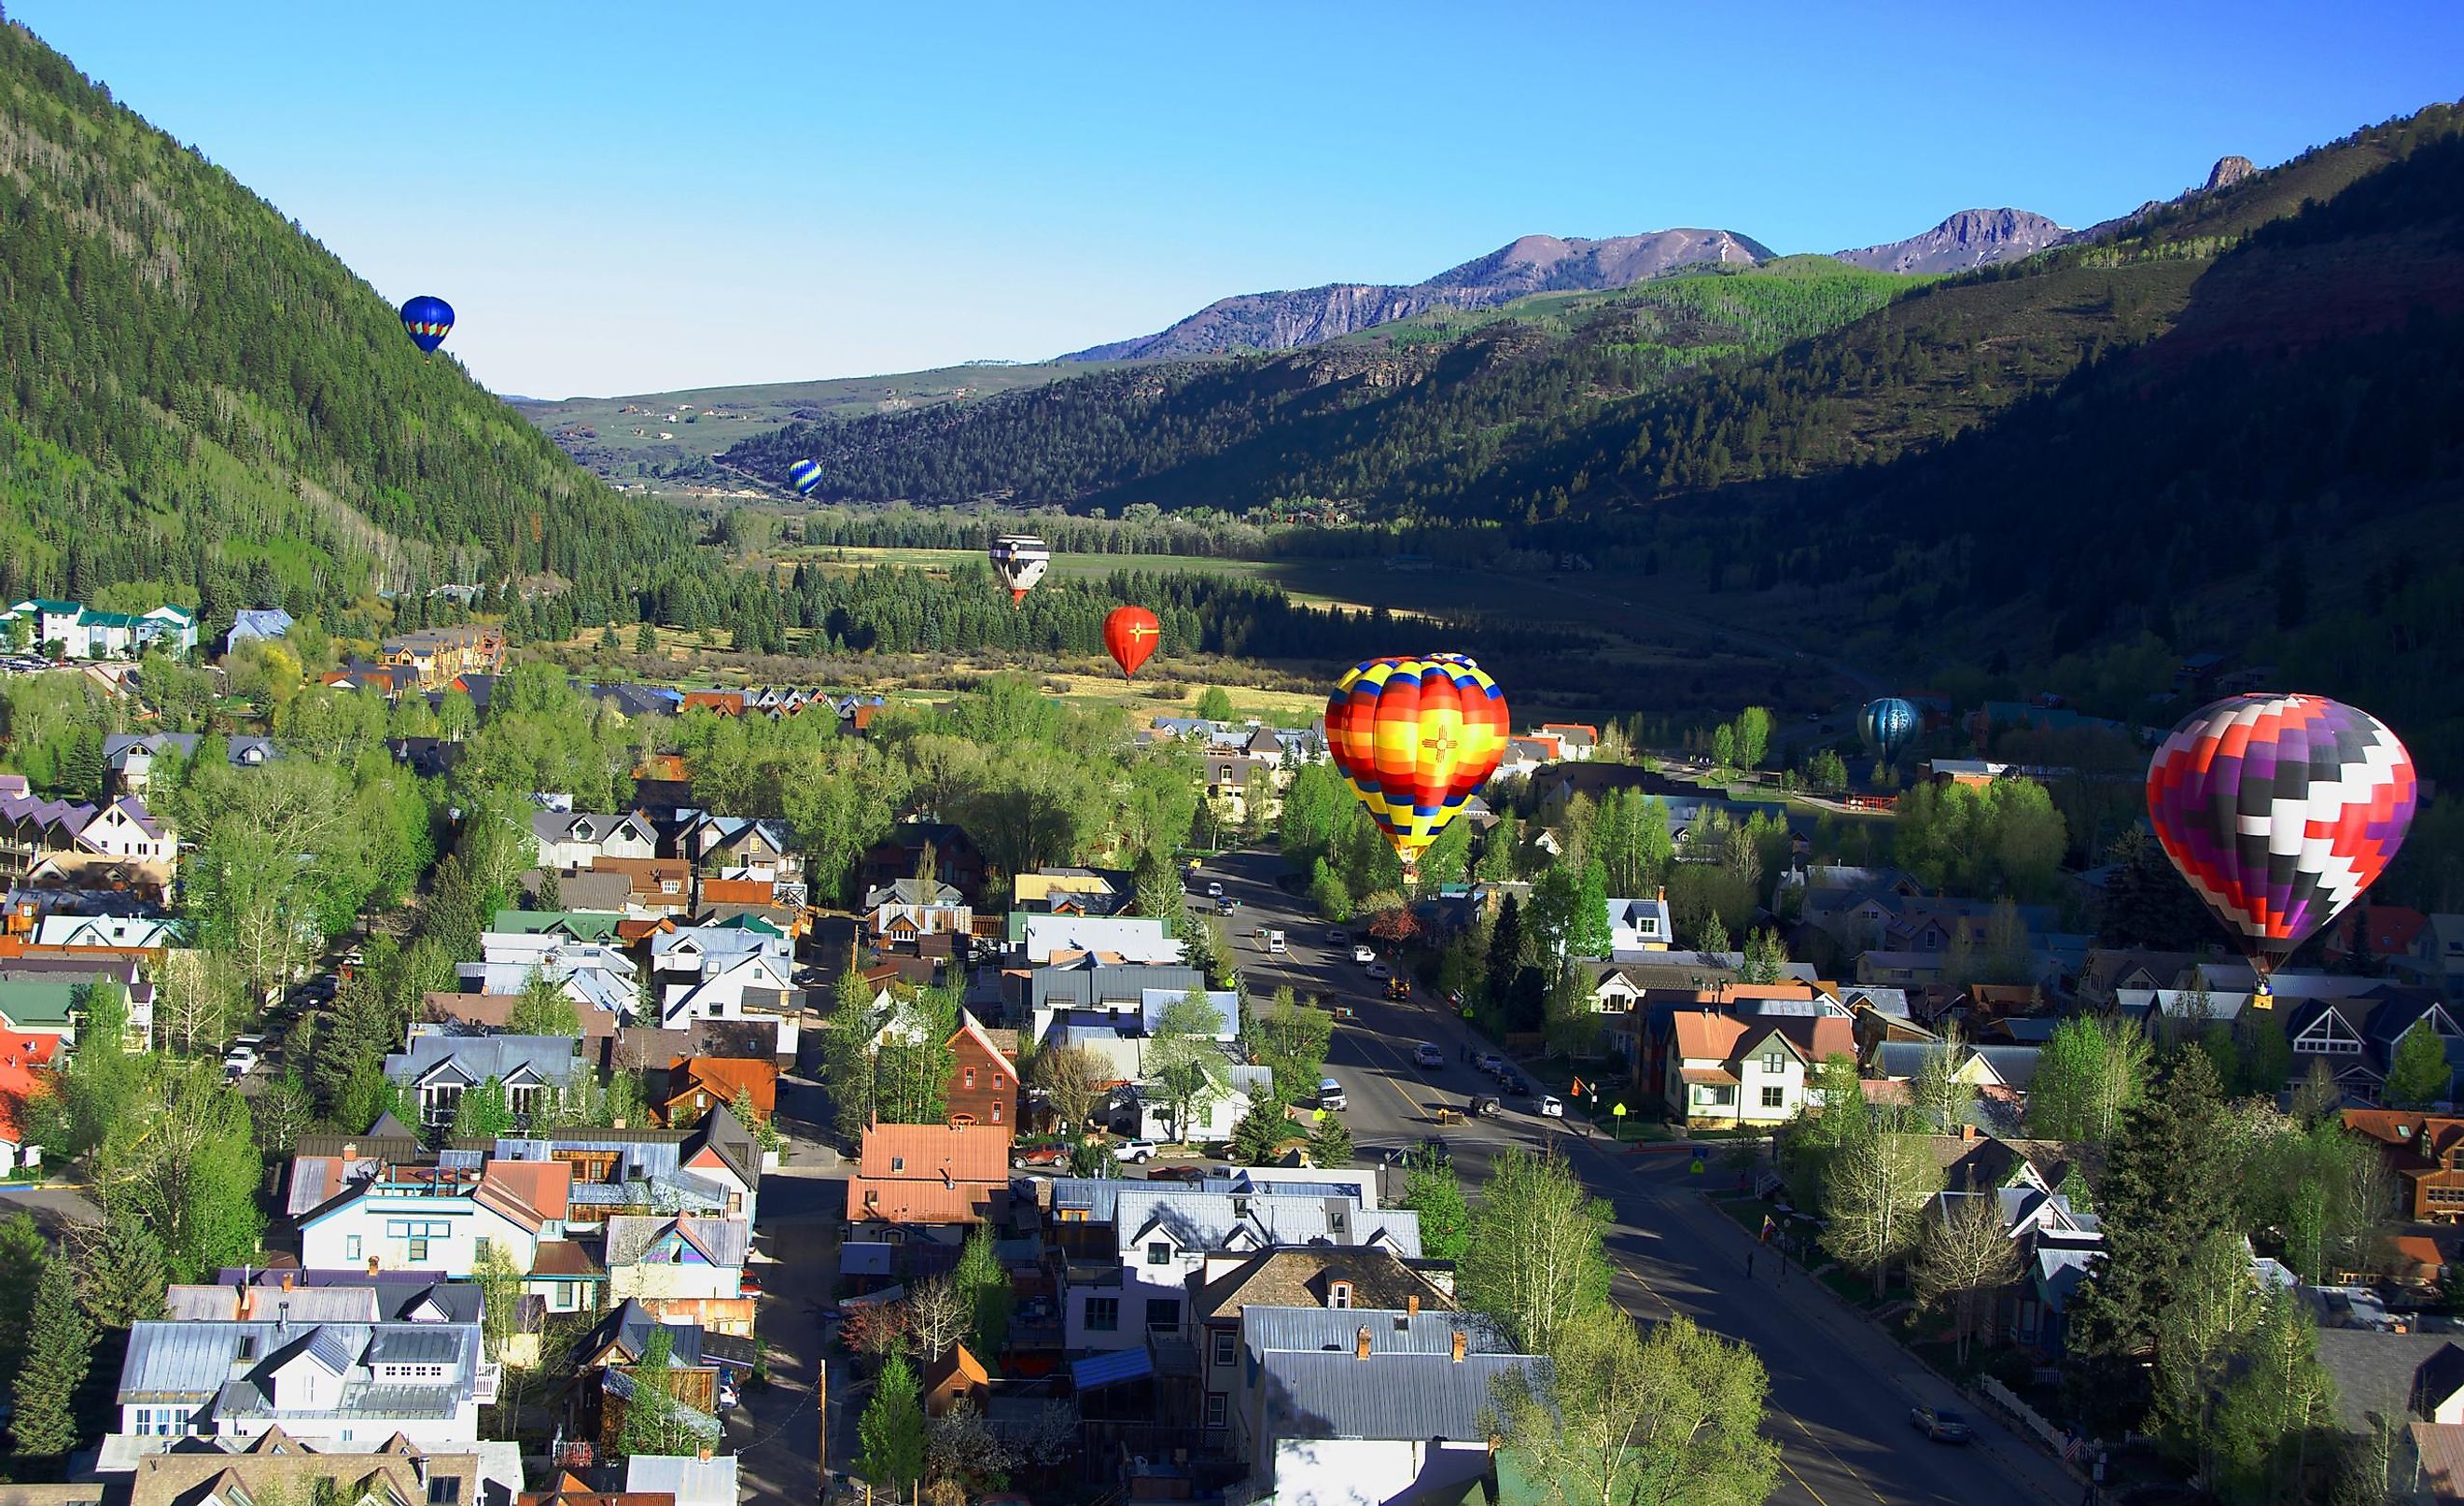 Balloon festival in Telluride Hot Air balloons flying over Town in the morning,Telluride, Colorado